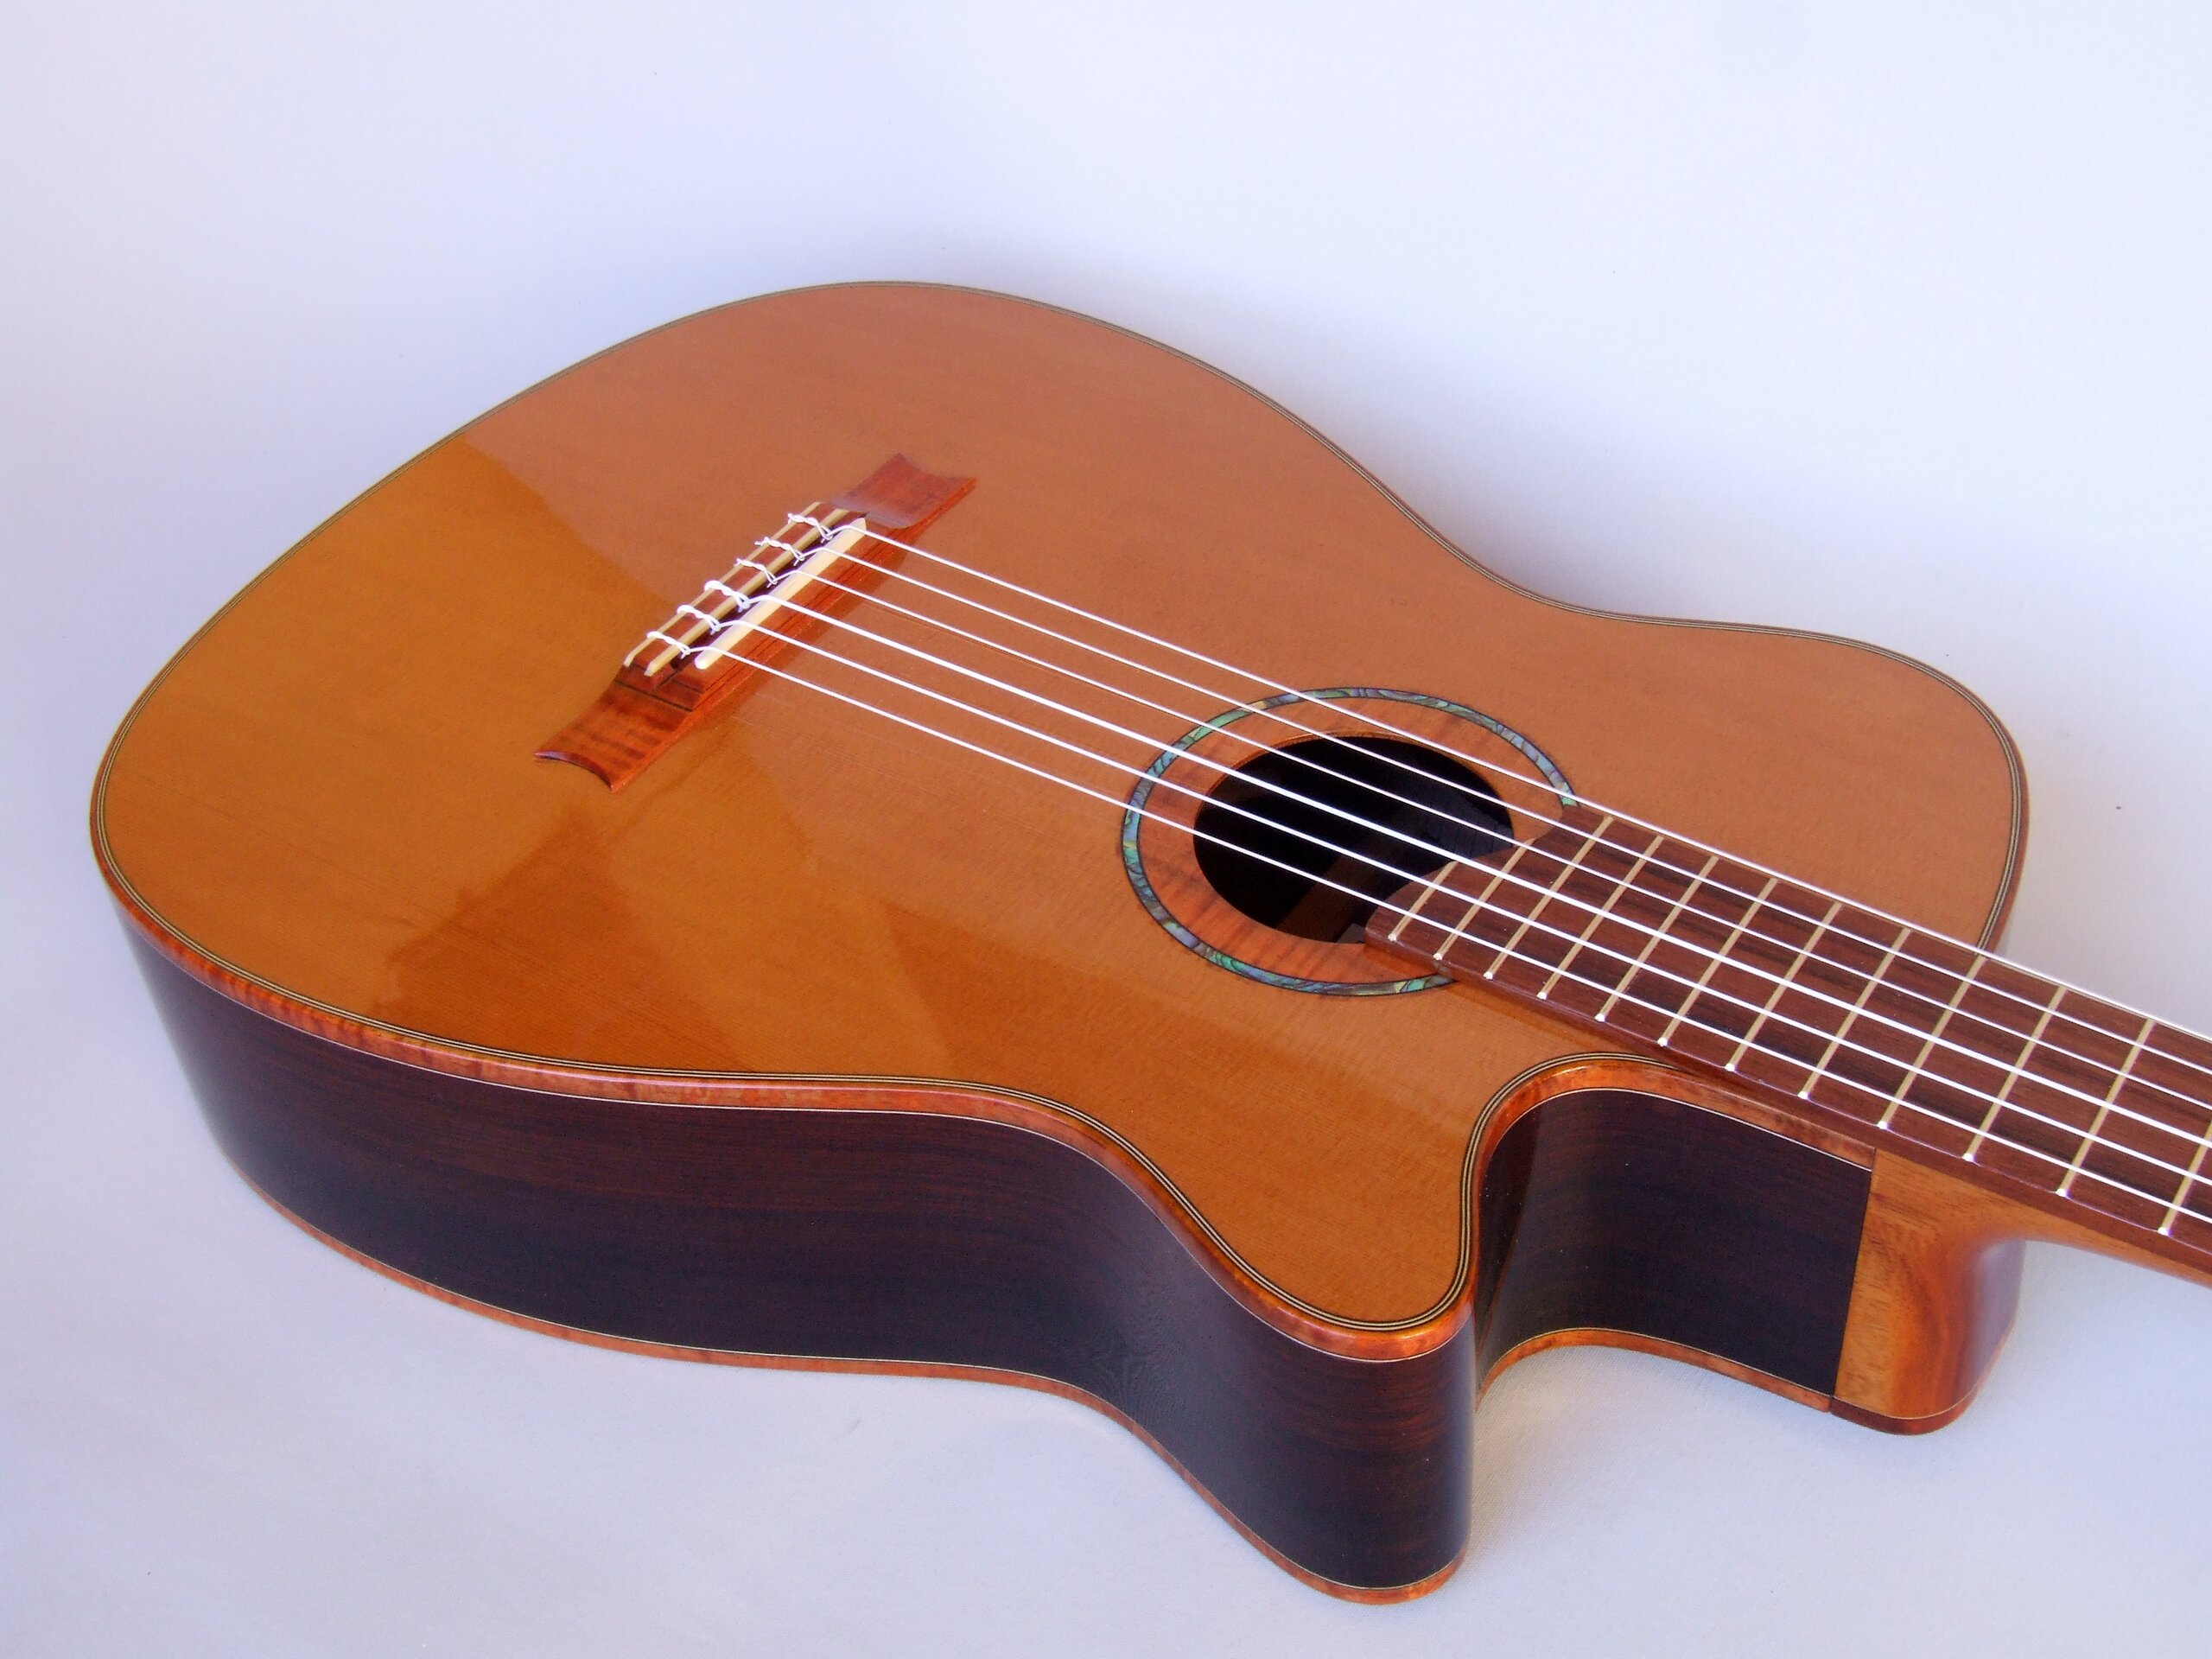 Neo-classical guitar with cutaway, cedar top, rosewood back and sides